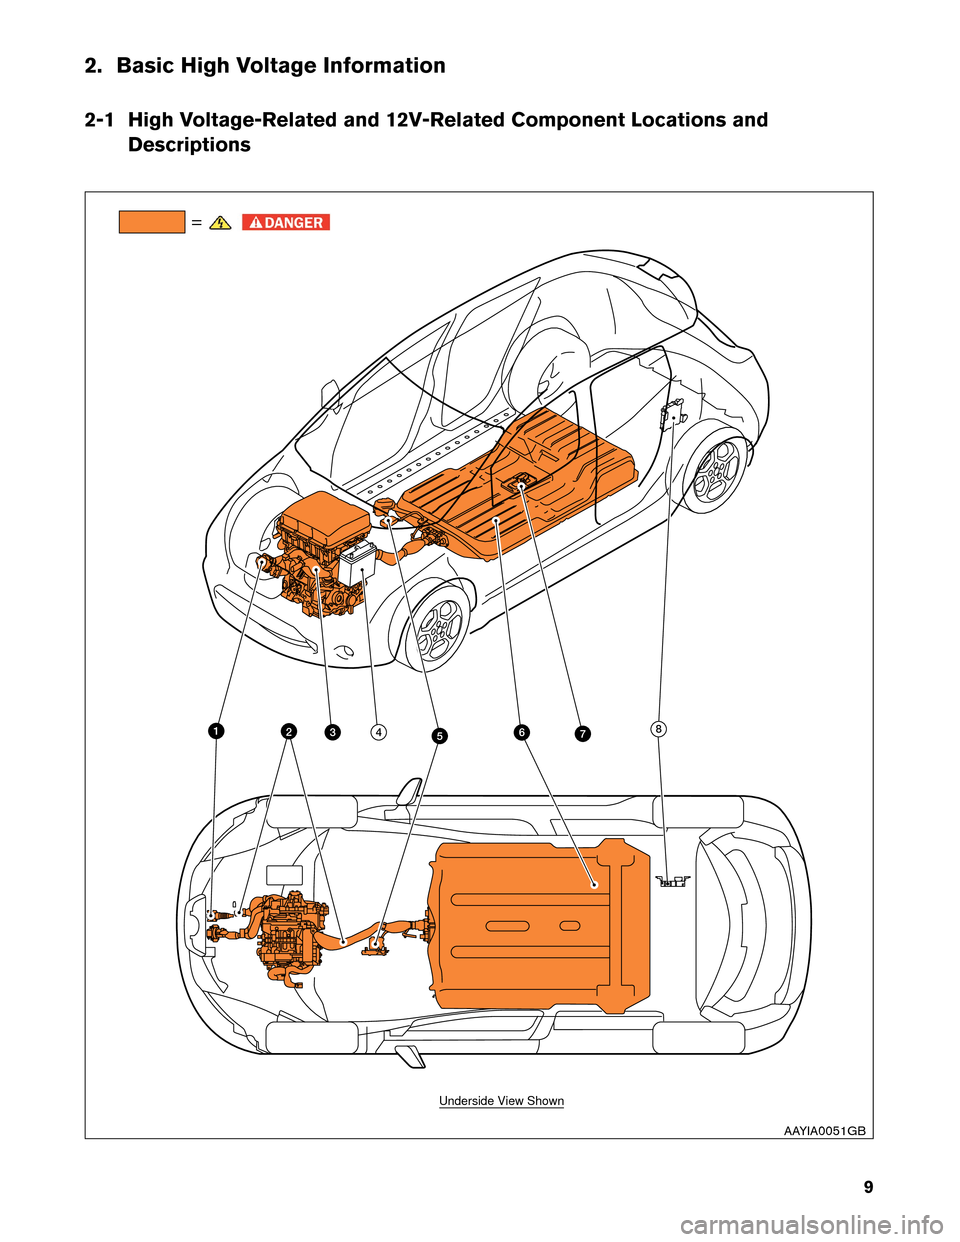 NISSAN LEAF 2013 1.G Roadside Assistance Guide 2. Basic High Voltage Information
2-1
High Voltage-Related and 12V-Related Component Locations and
Descriptions =
76
342 8
5 1
Underside View Shown
AAYIA0051GB
9  